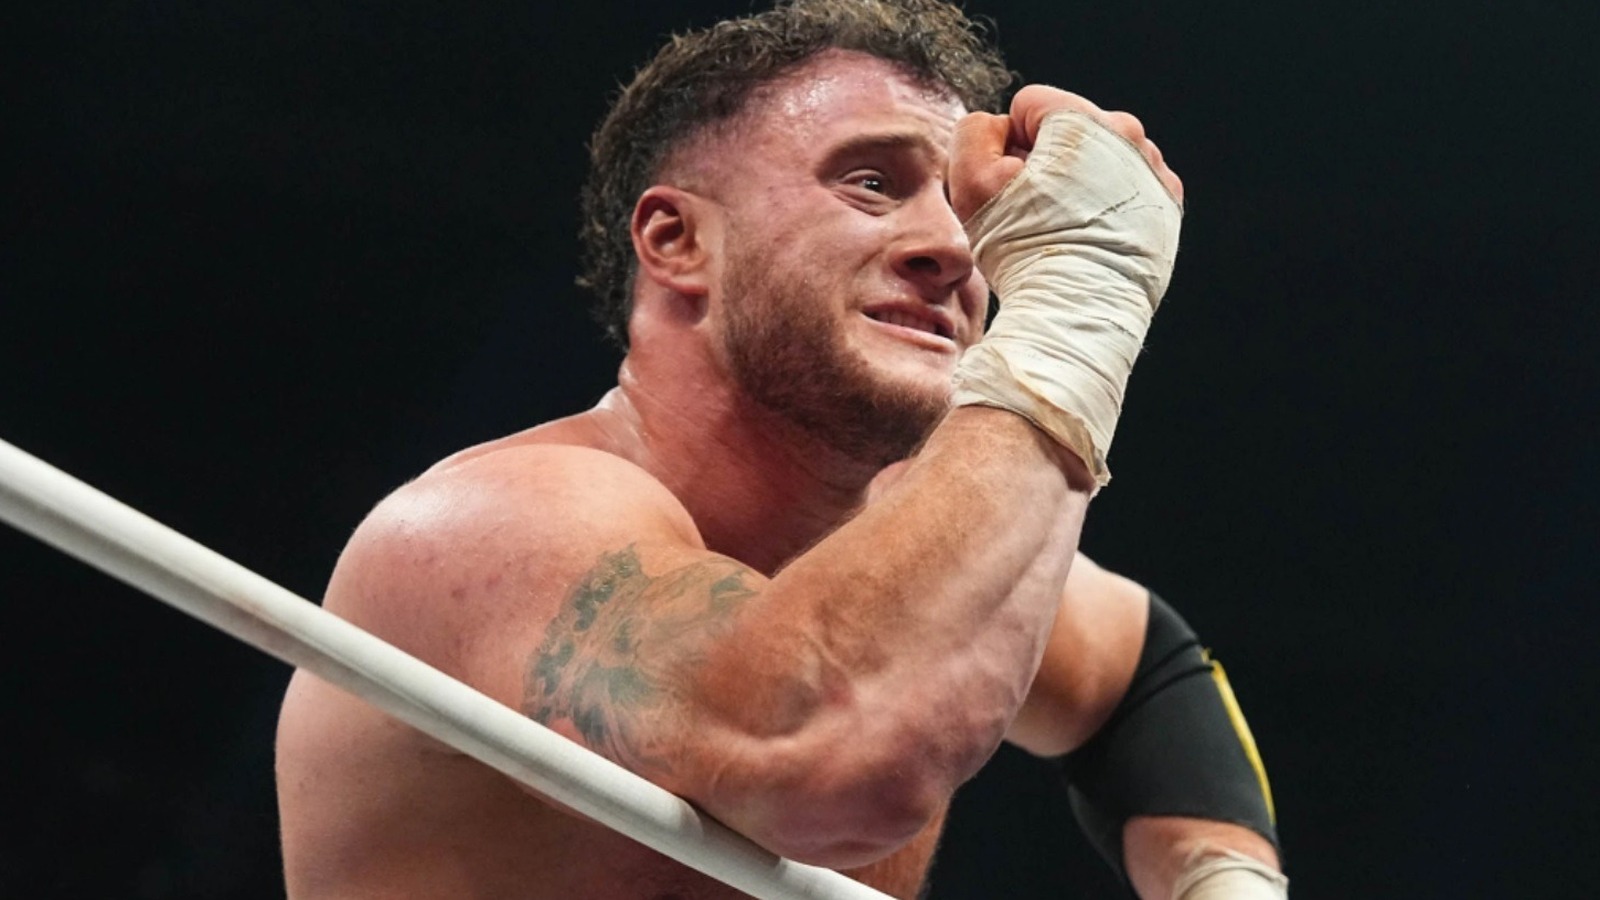 AEW Champion MJF Discusses Reduced Screen Time In The Iron Claw, Executive Producer Role